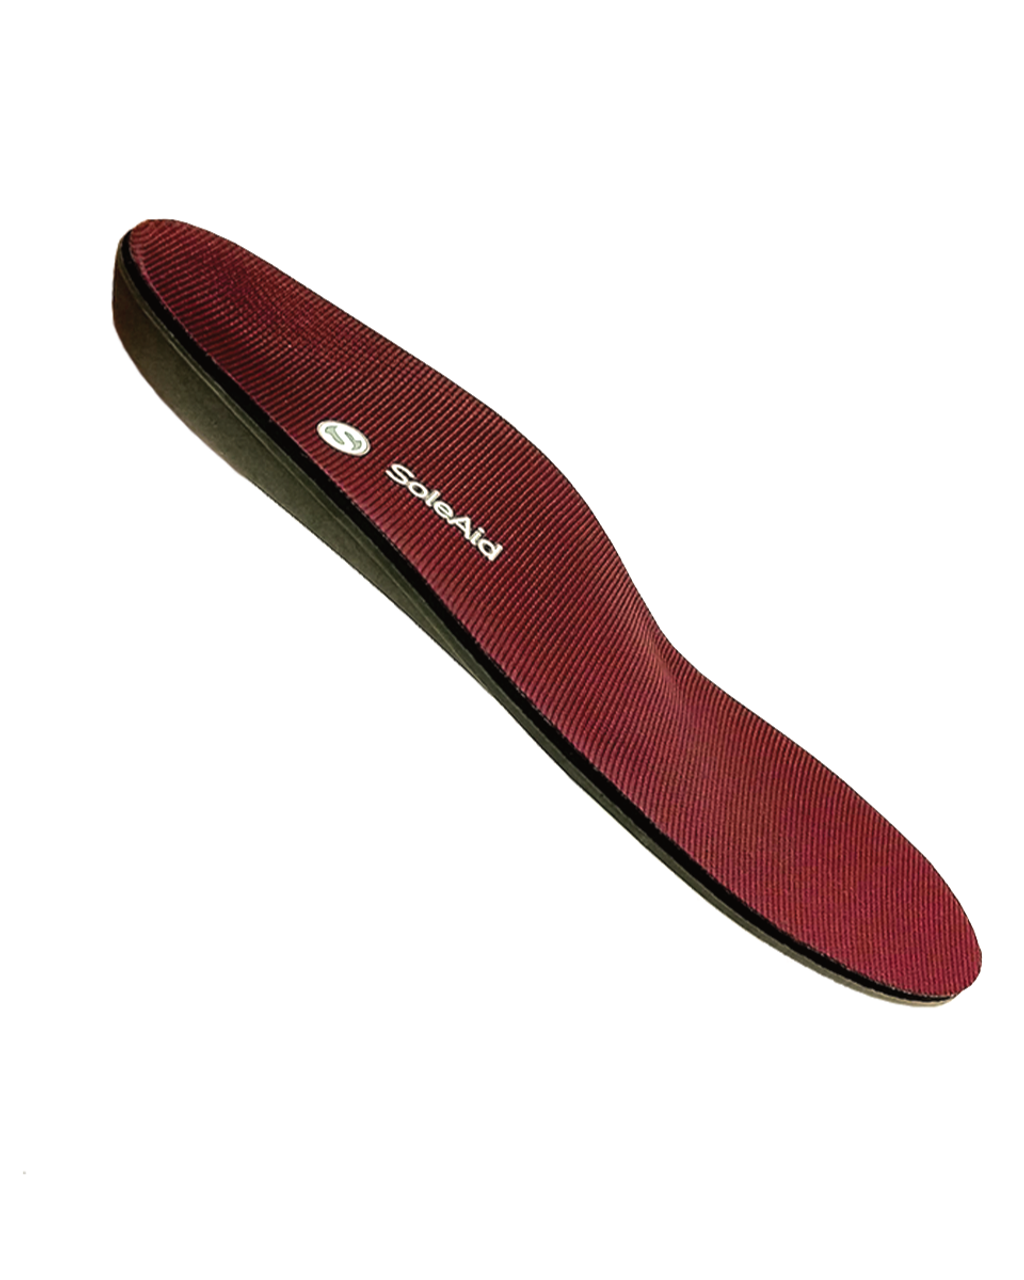 SoleAid 3.0 Performance Insole